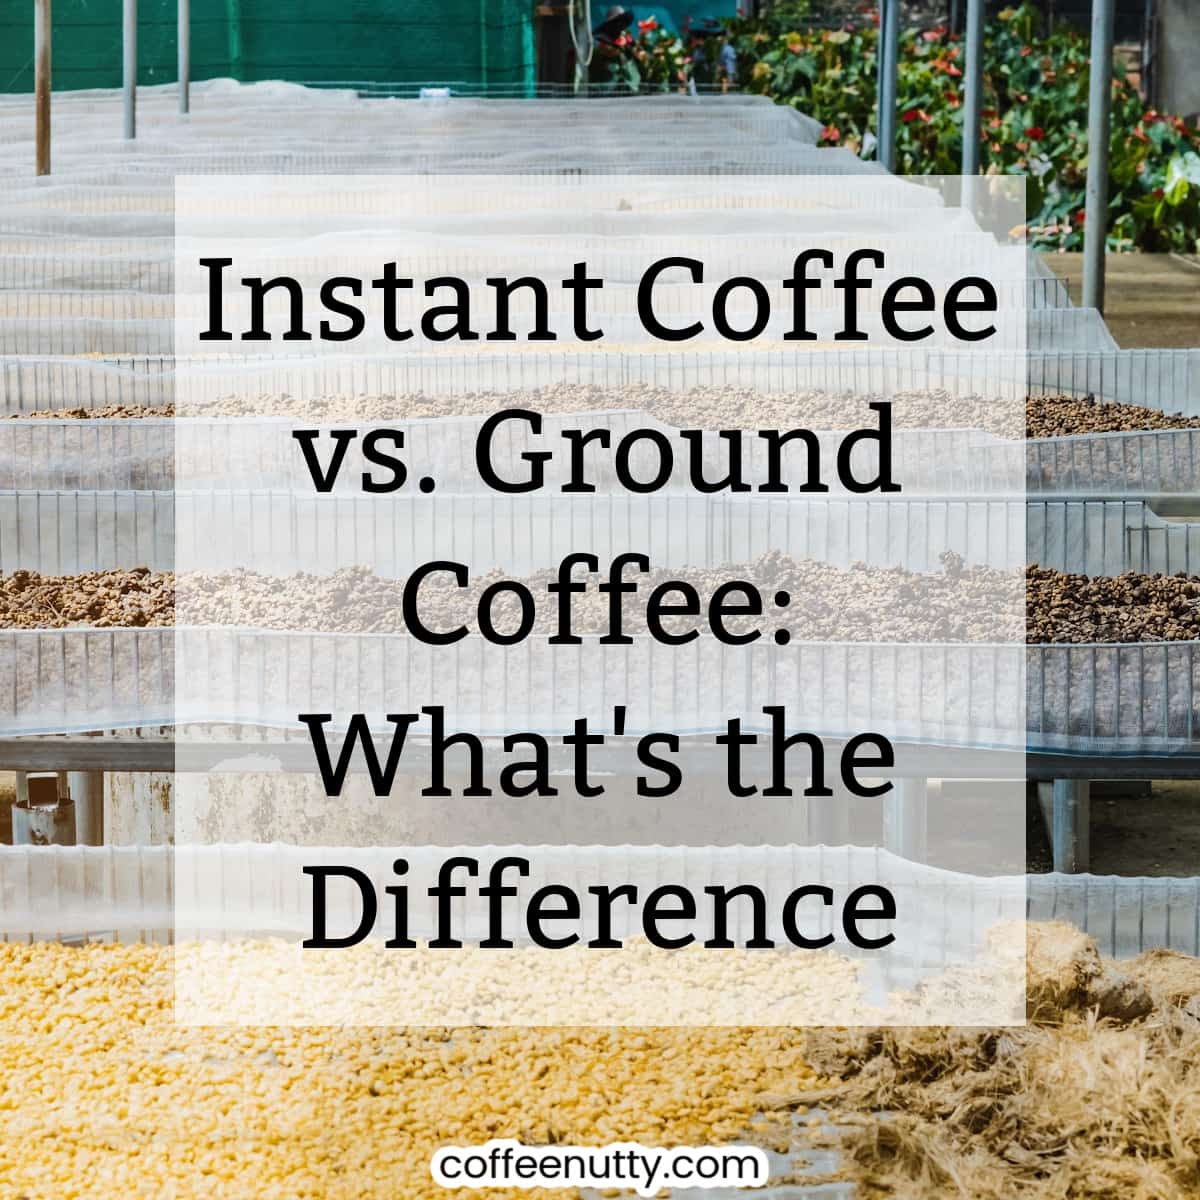 Various coffee drying with text overlay reading "instant coffee vs. ground coffee: what's the difference?".